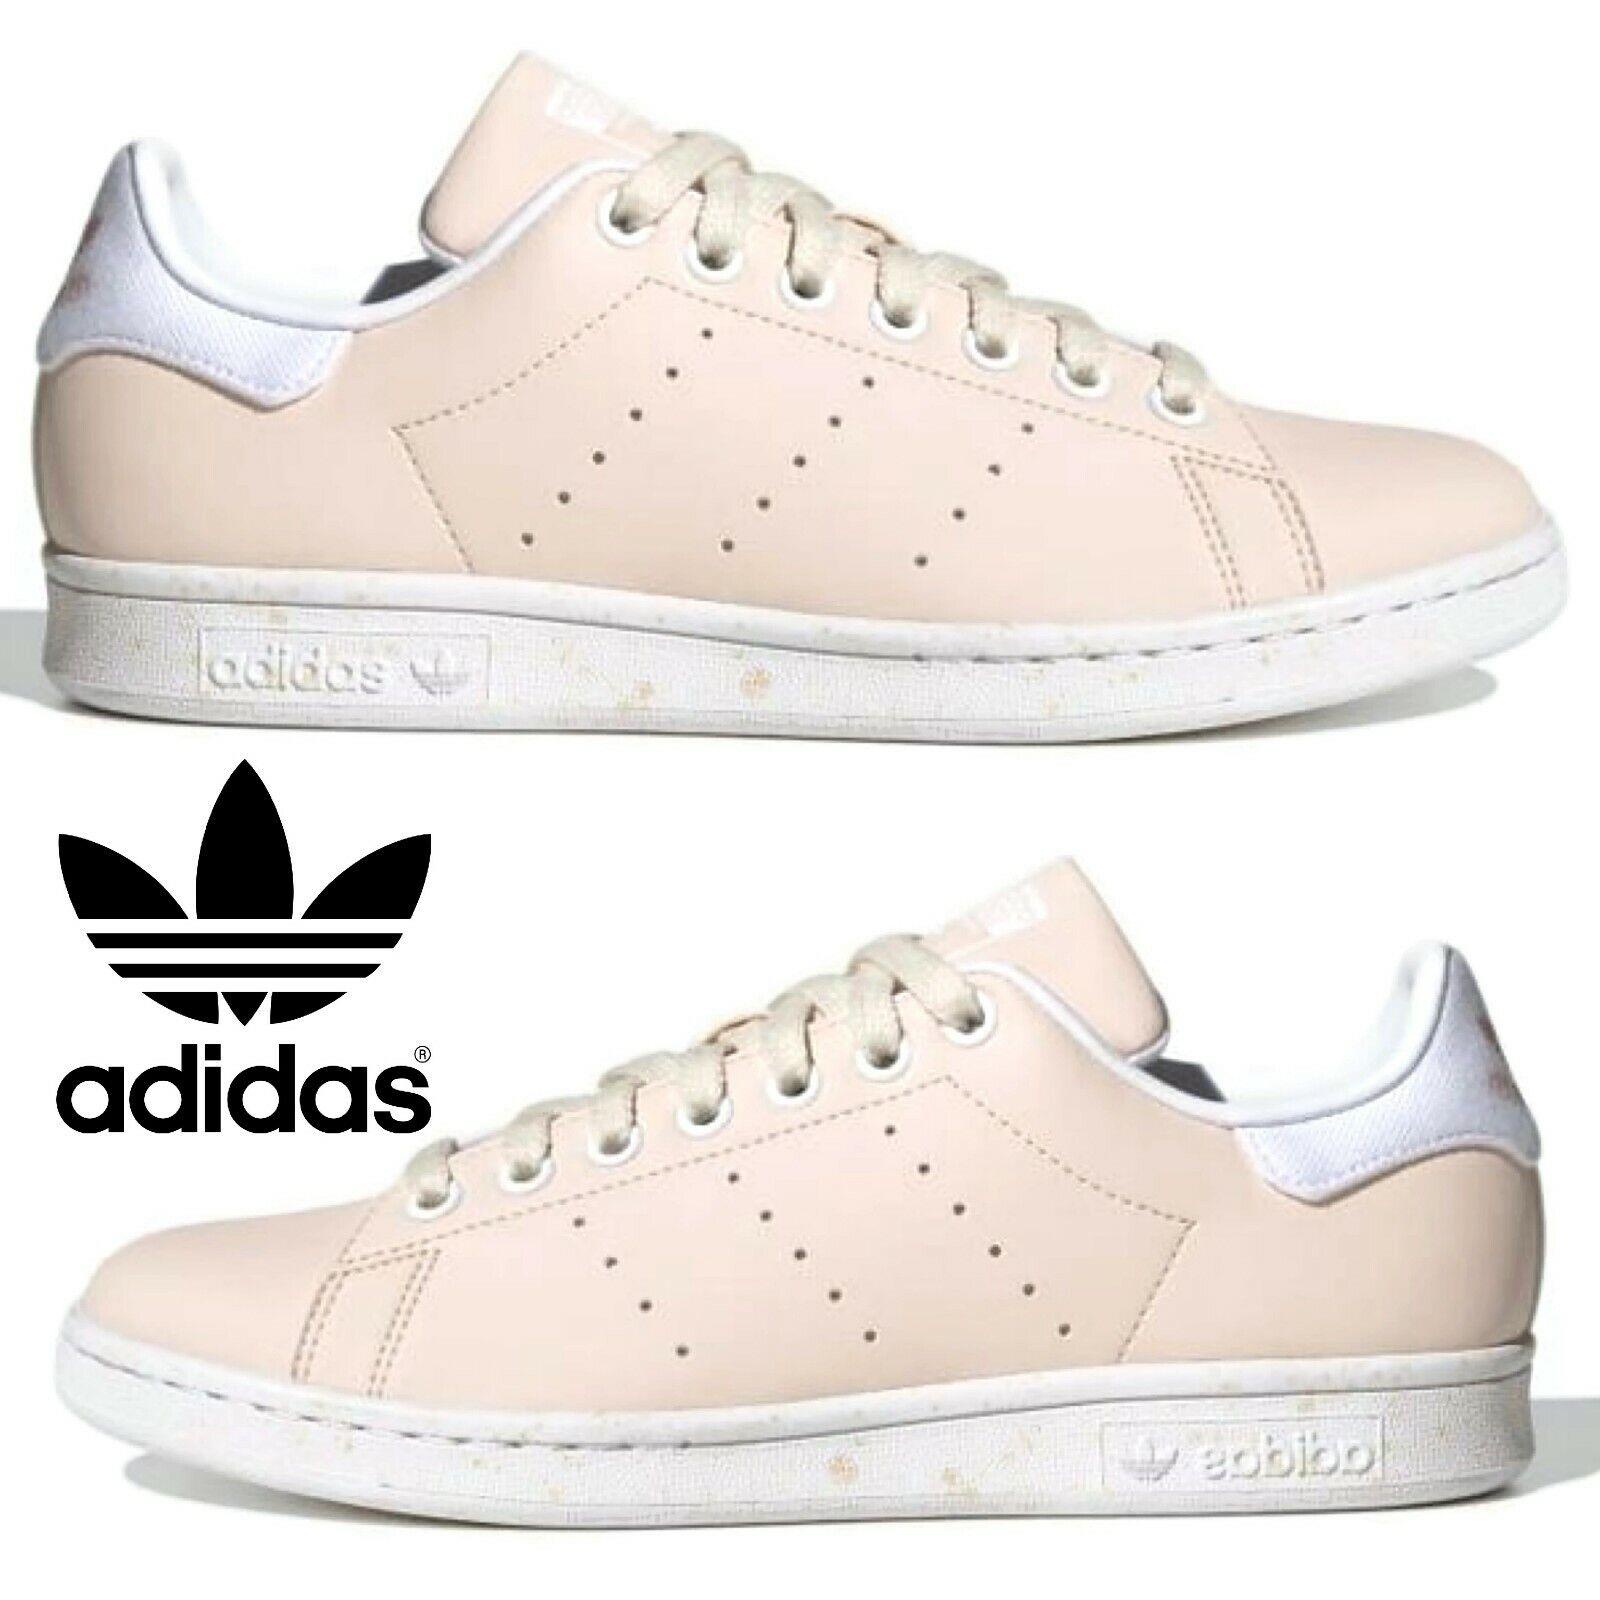 Adidas Originals Stan Smith Women s Sneakers Casual Shoes Sport Gym Mauve Pink